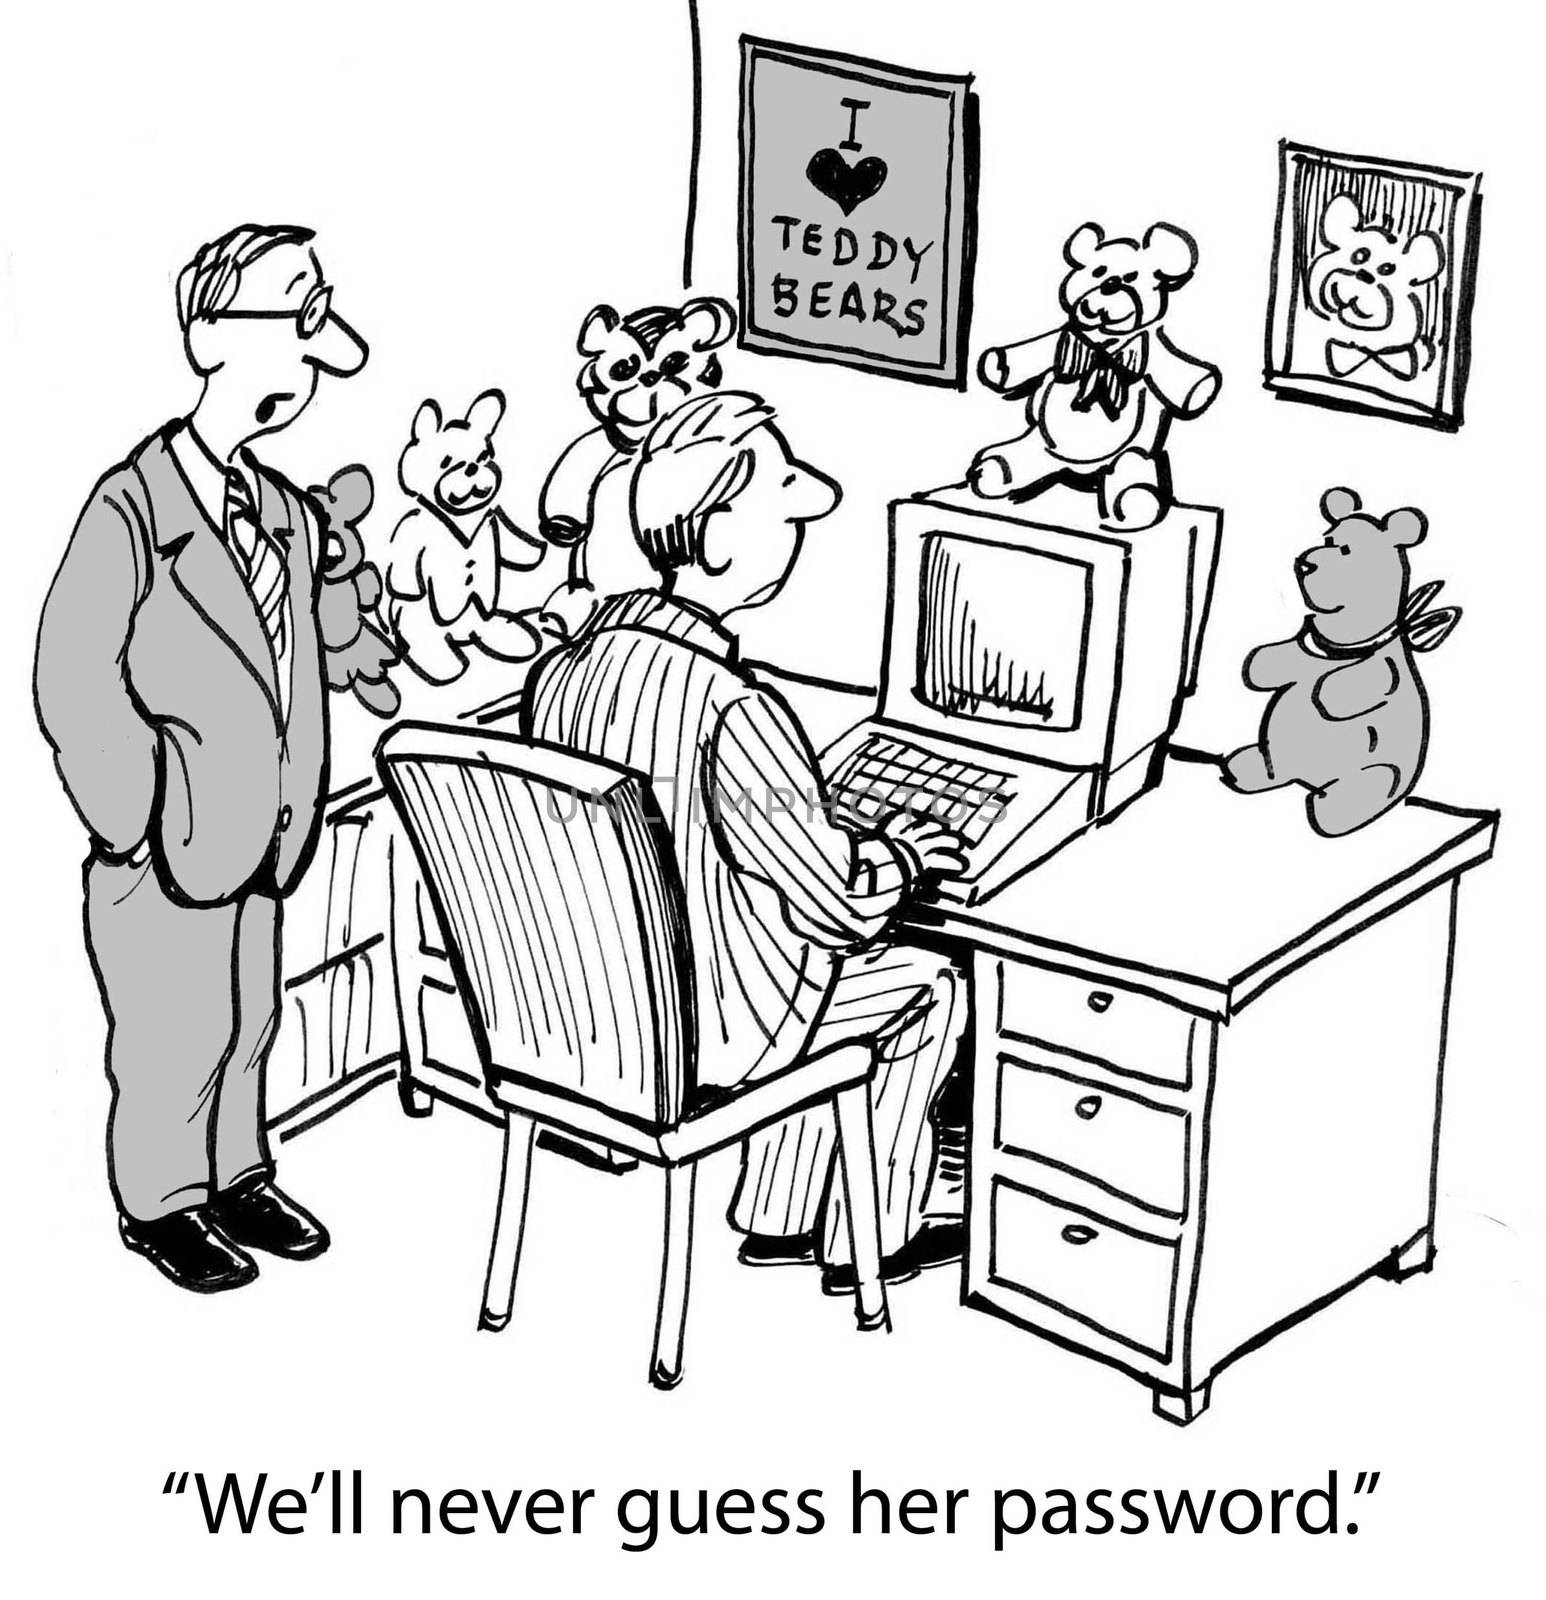 "We'll never guess her password." 